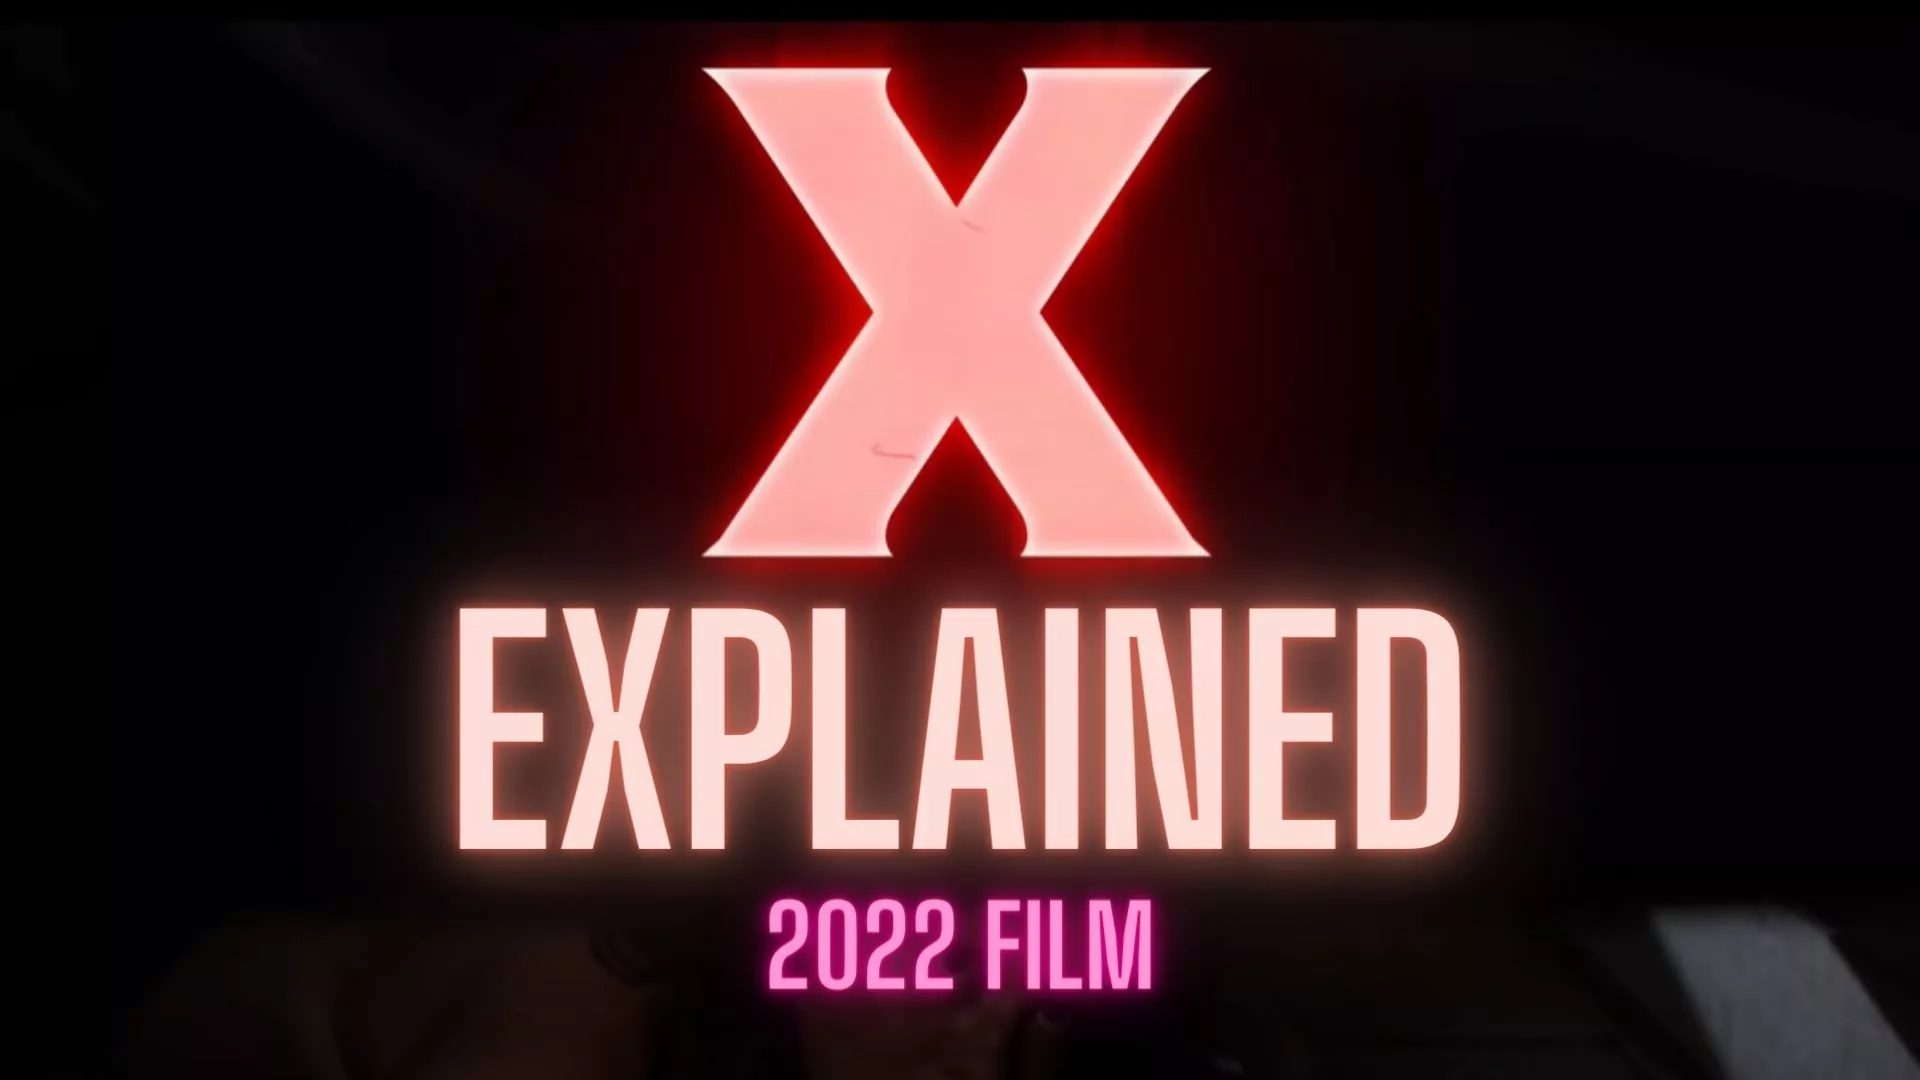 X Movie Explained | What happens at the end of 'X' Movie 2022